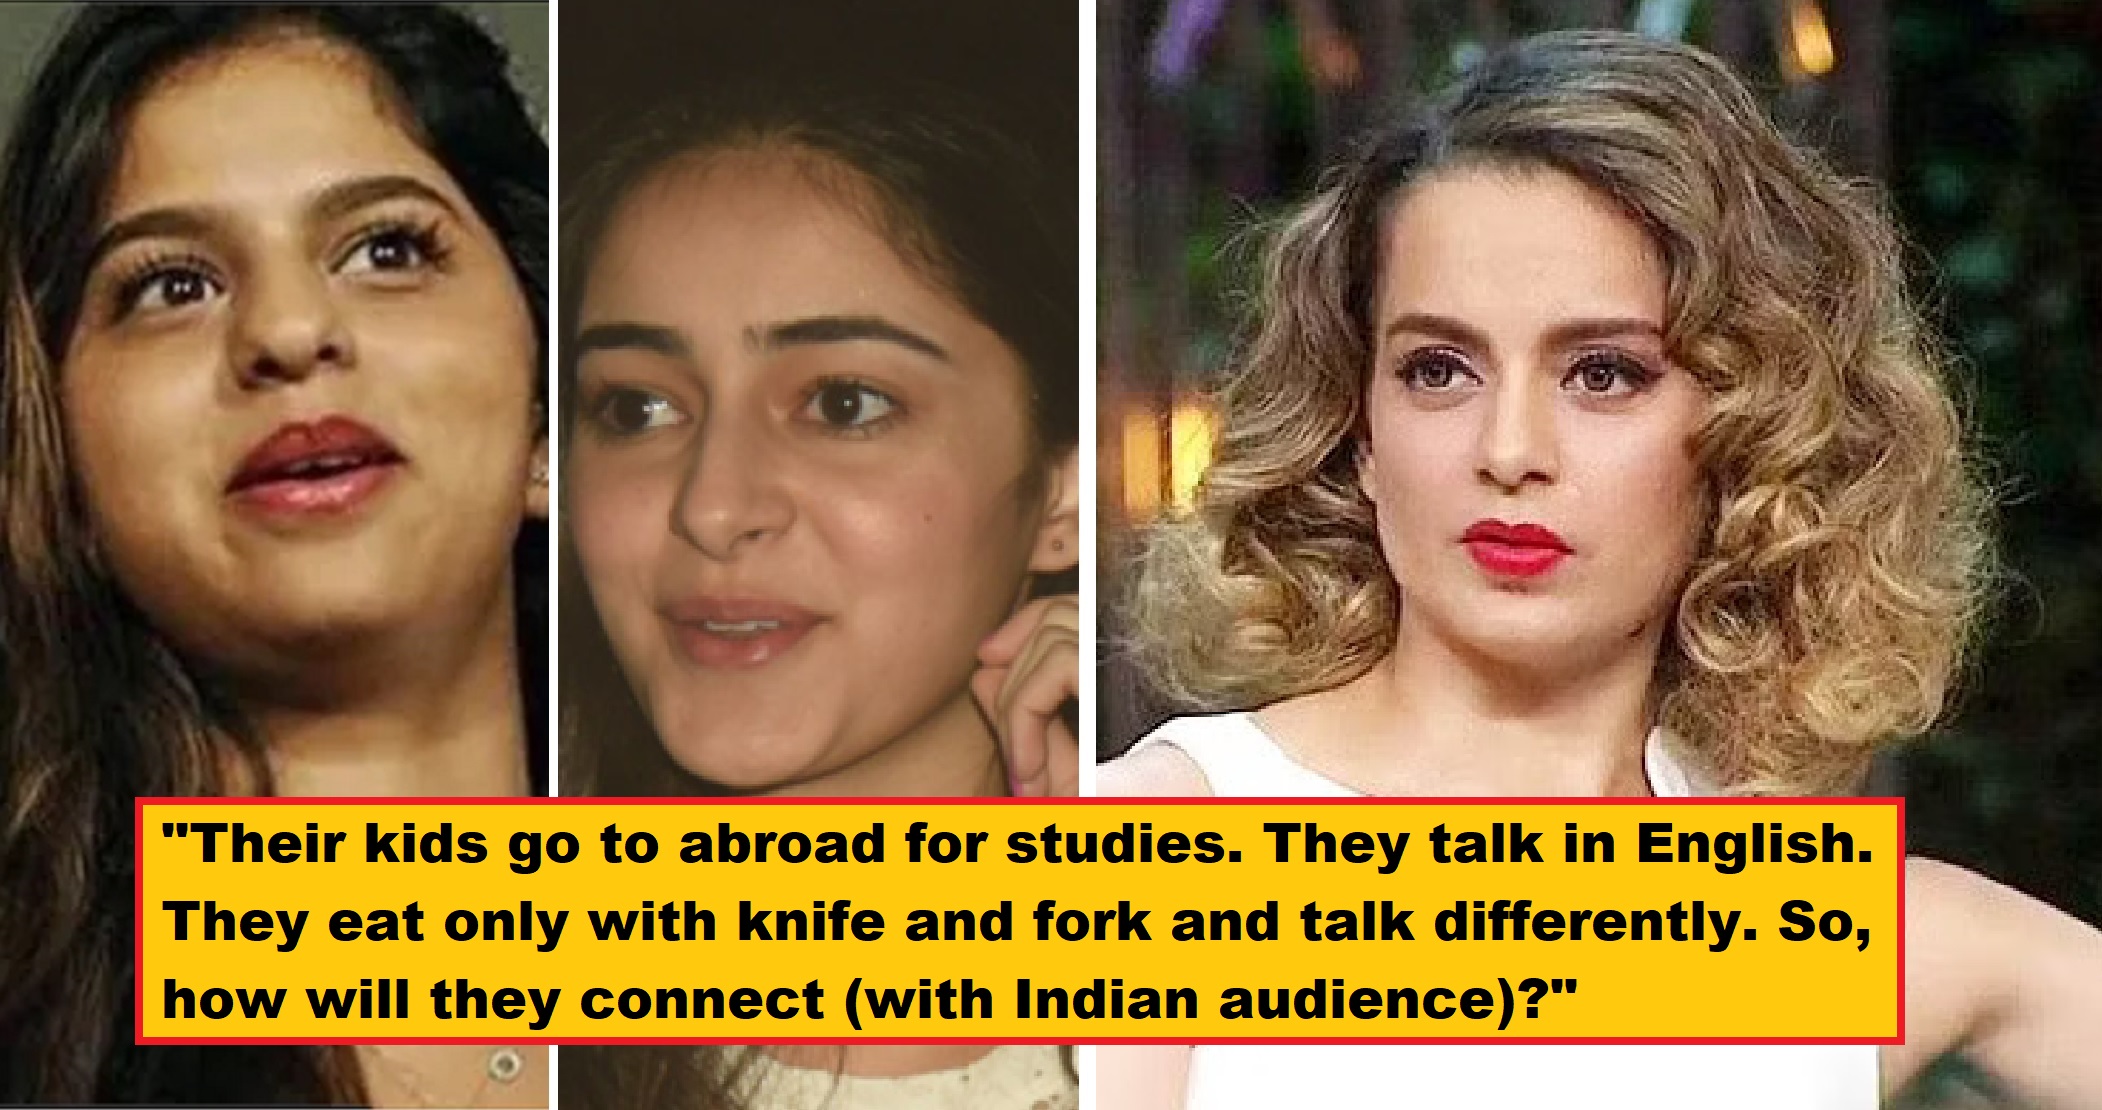 Kangana Ranaut Says Hindi Films Are Not Working Because of ‘Star Kids’: “They Look Like Boiled Eggs”